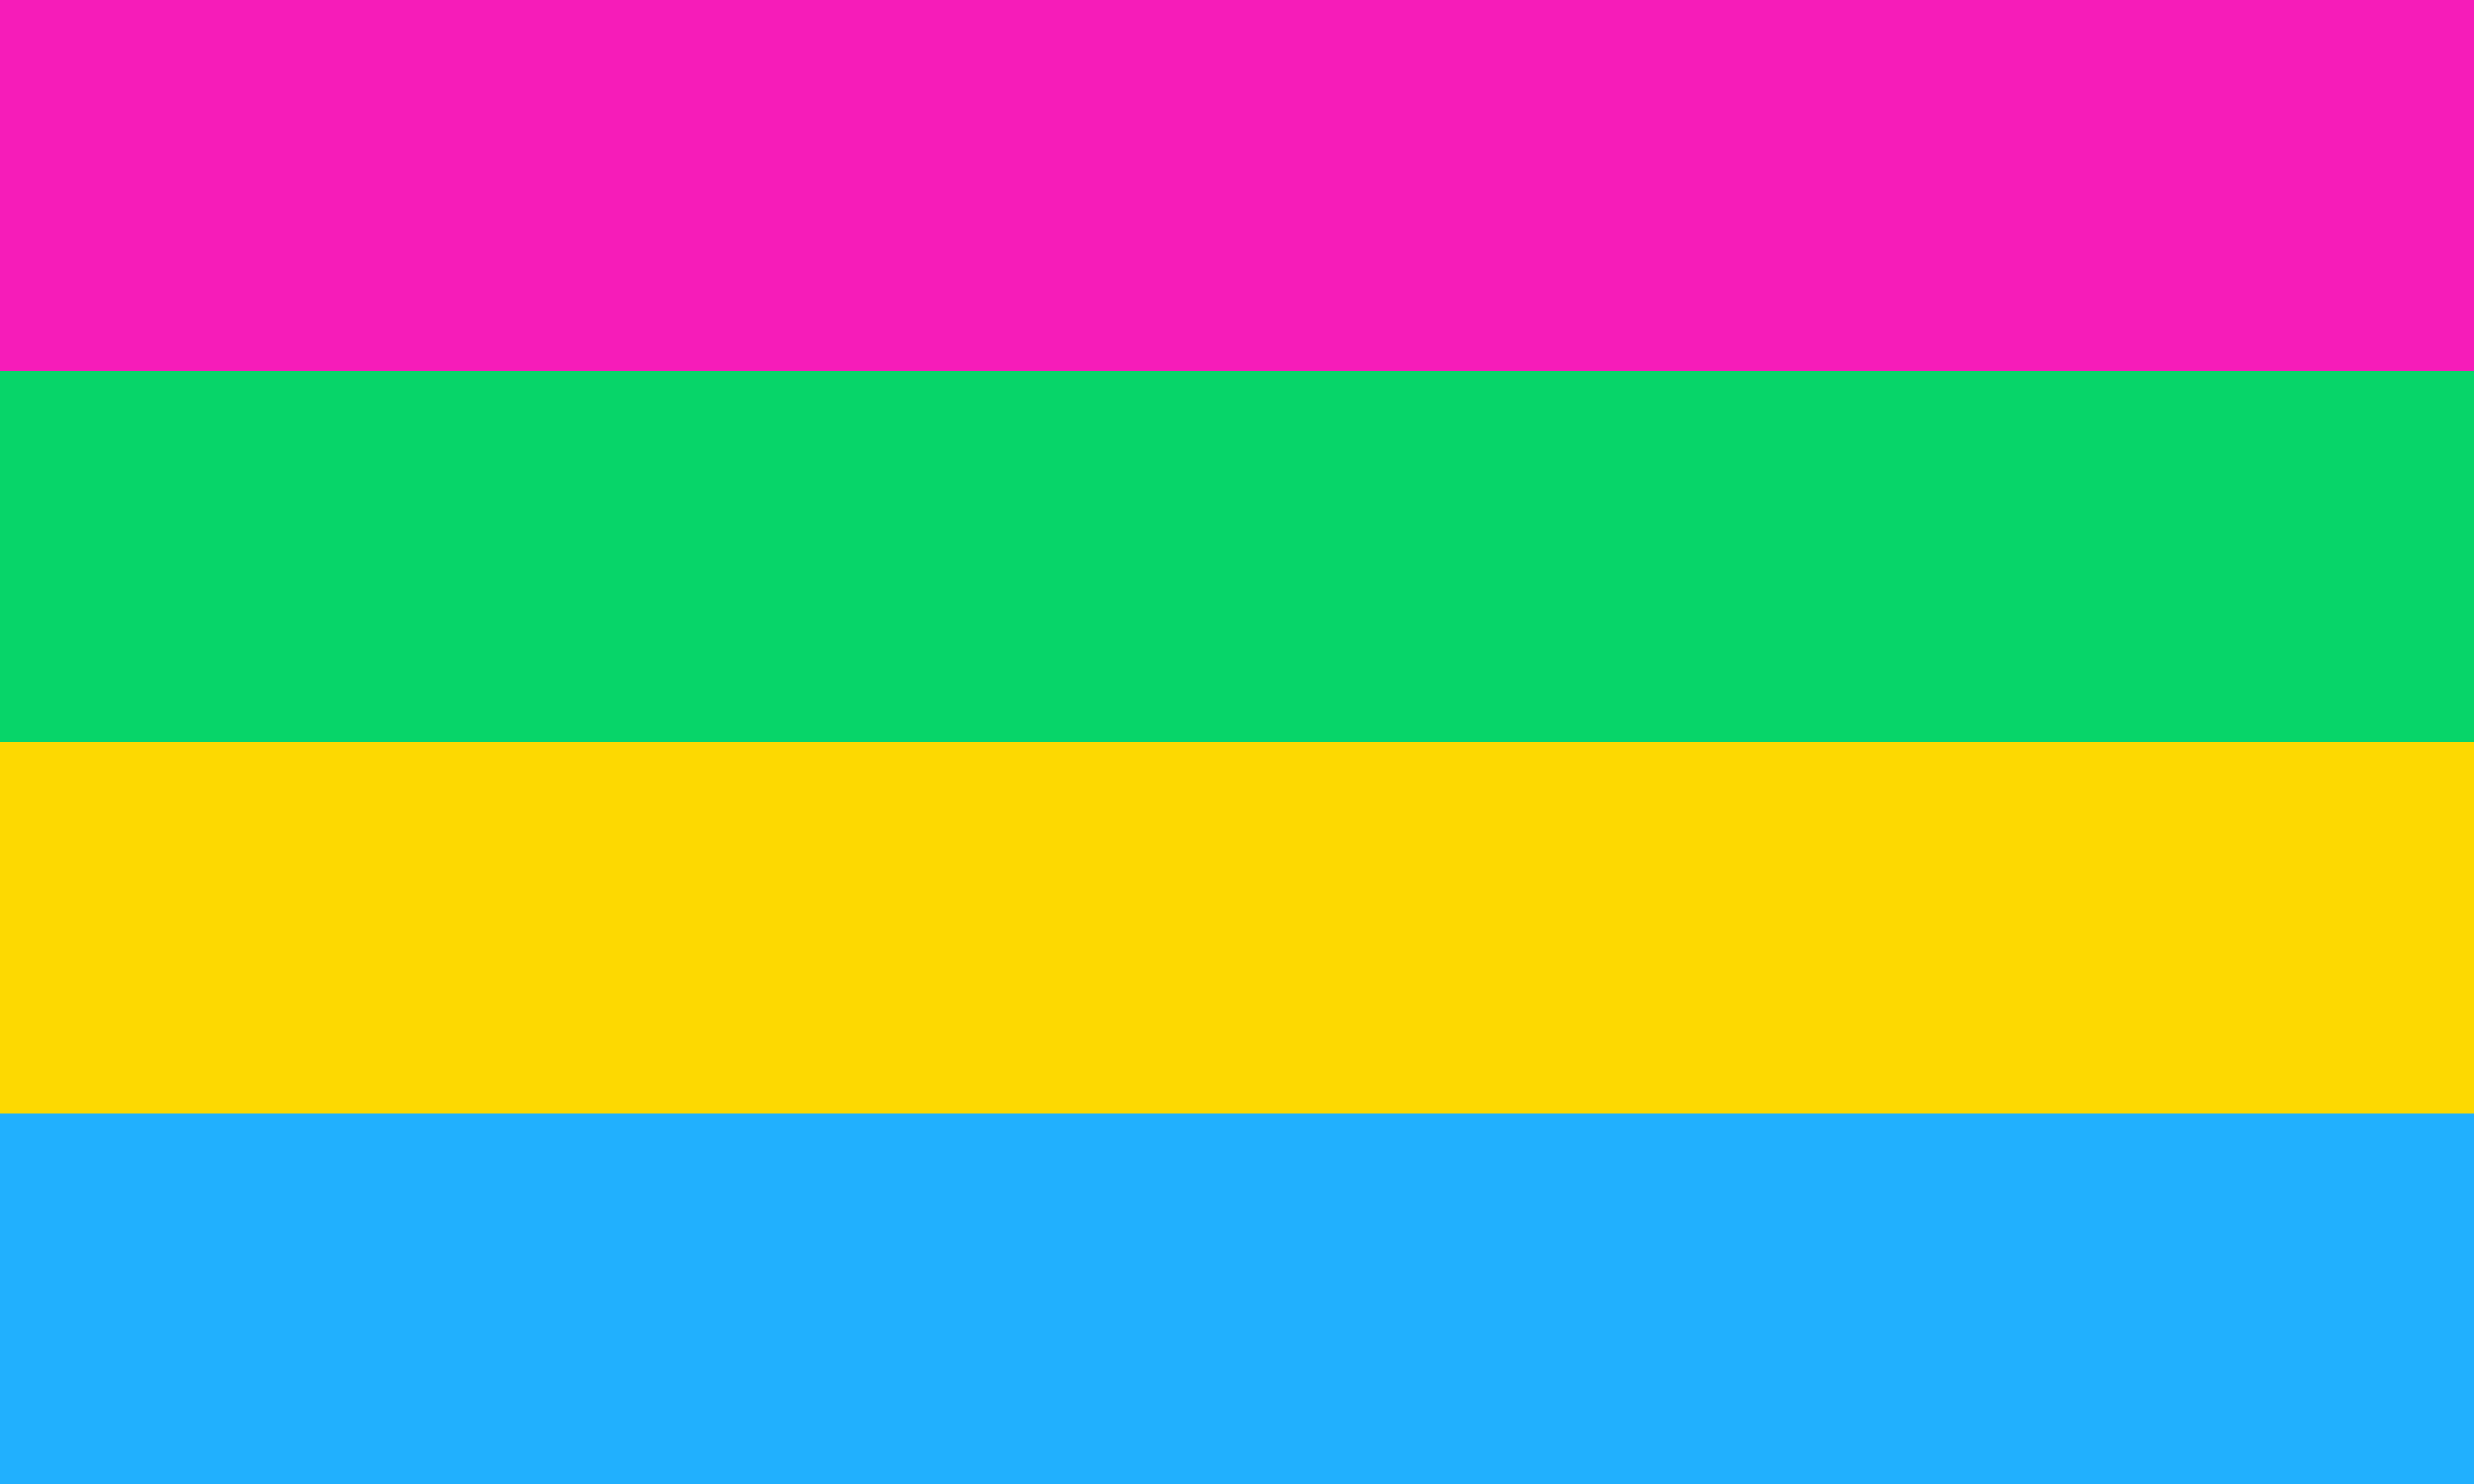 Polyamory Pansexual Flag - 2, 4 and no grommets styles. 